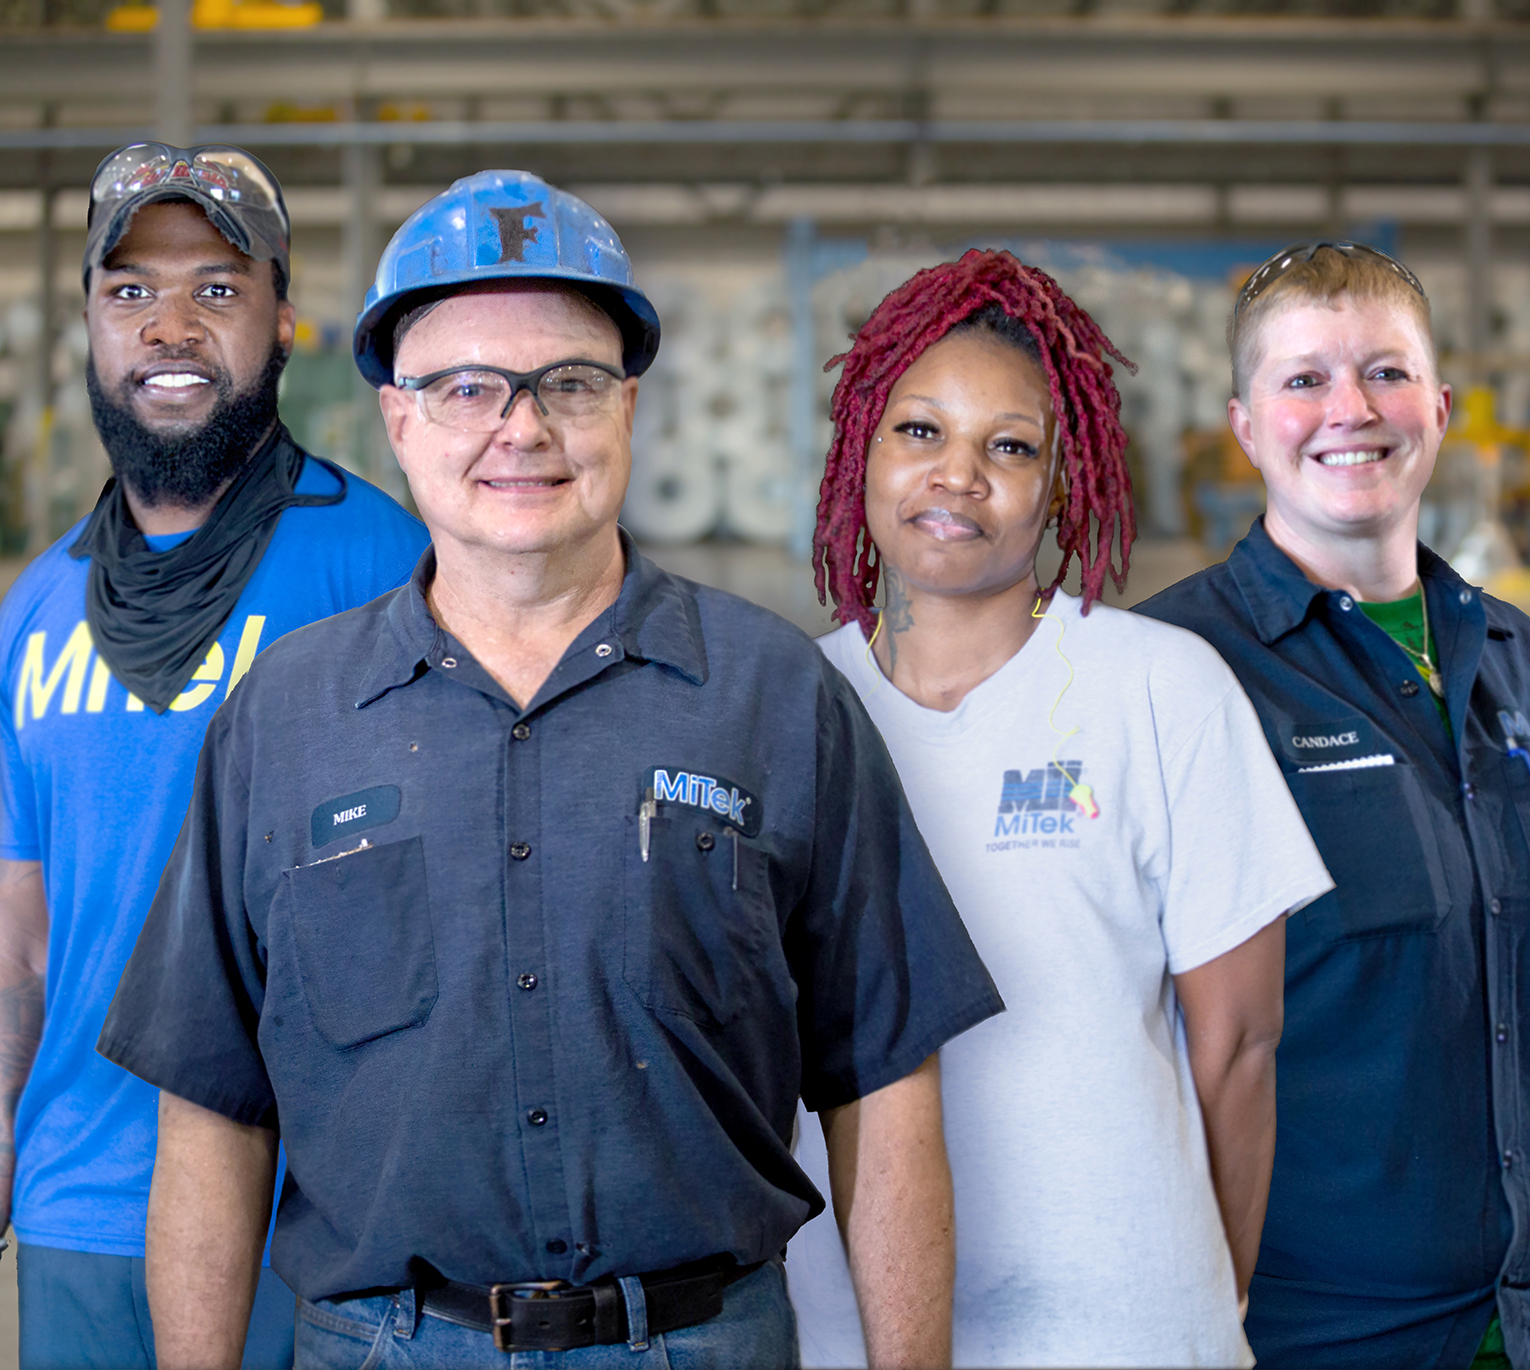 A group of mitek employees representing the manufacturing group